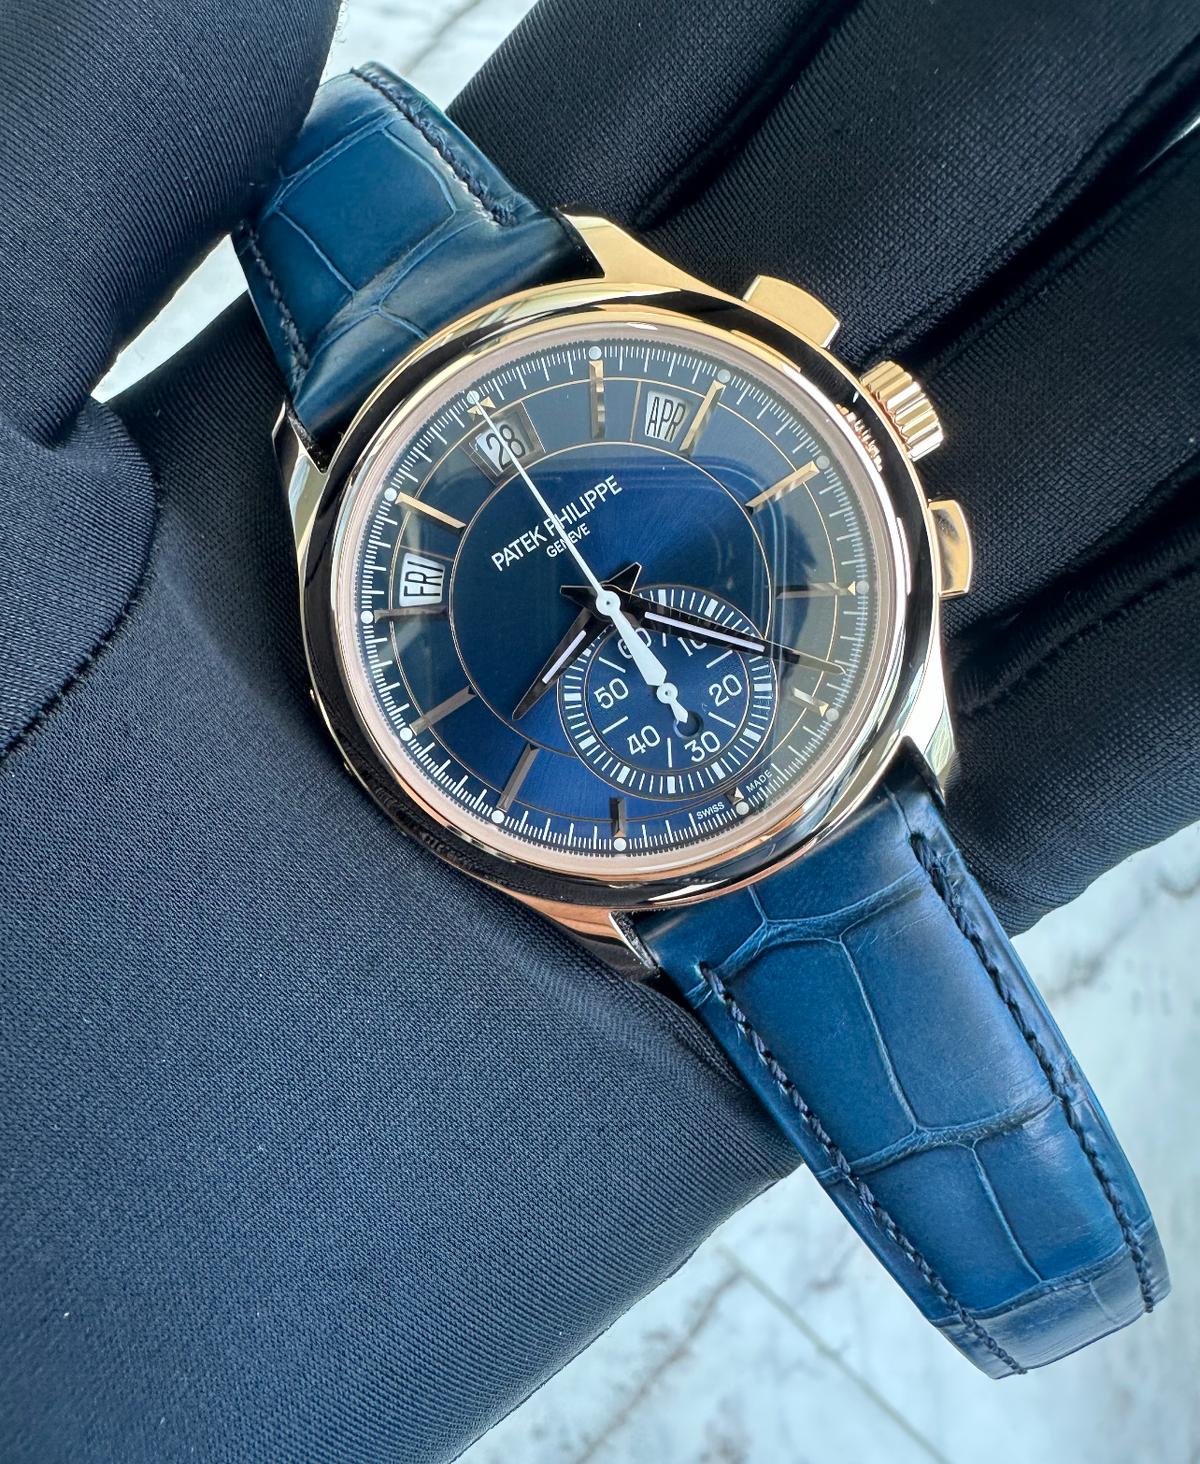 BRAND NEW BLUE PATEK PHILIPPE CHRONOGRAGH ANNUAL CALENDER COMES WITH BOX AND PAPERS